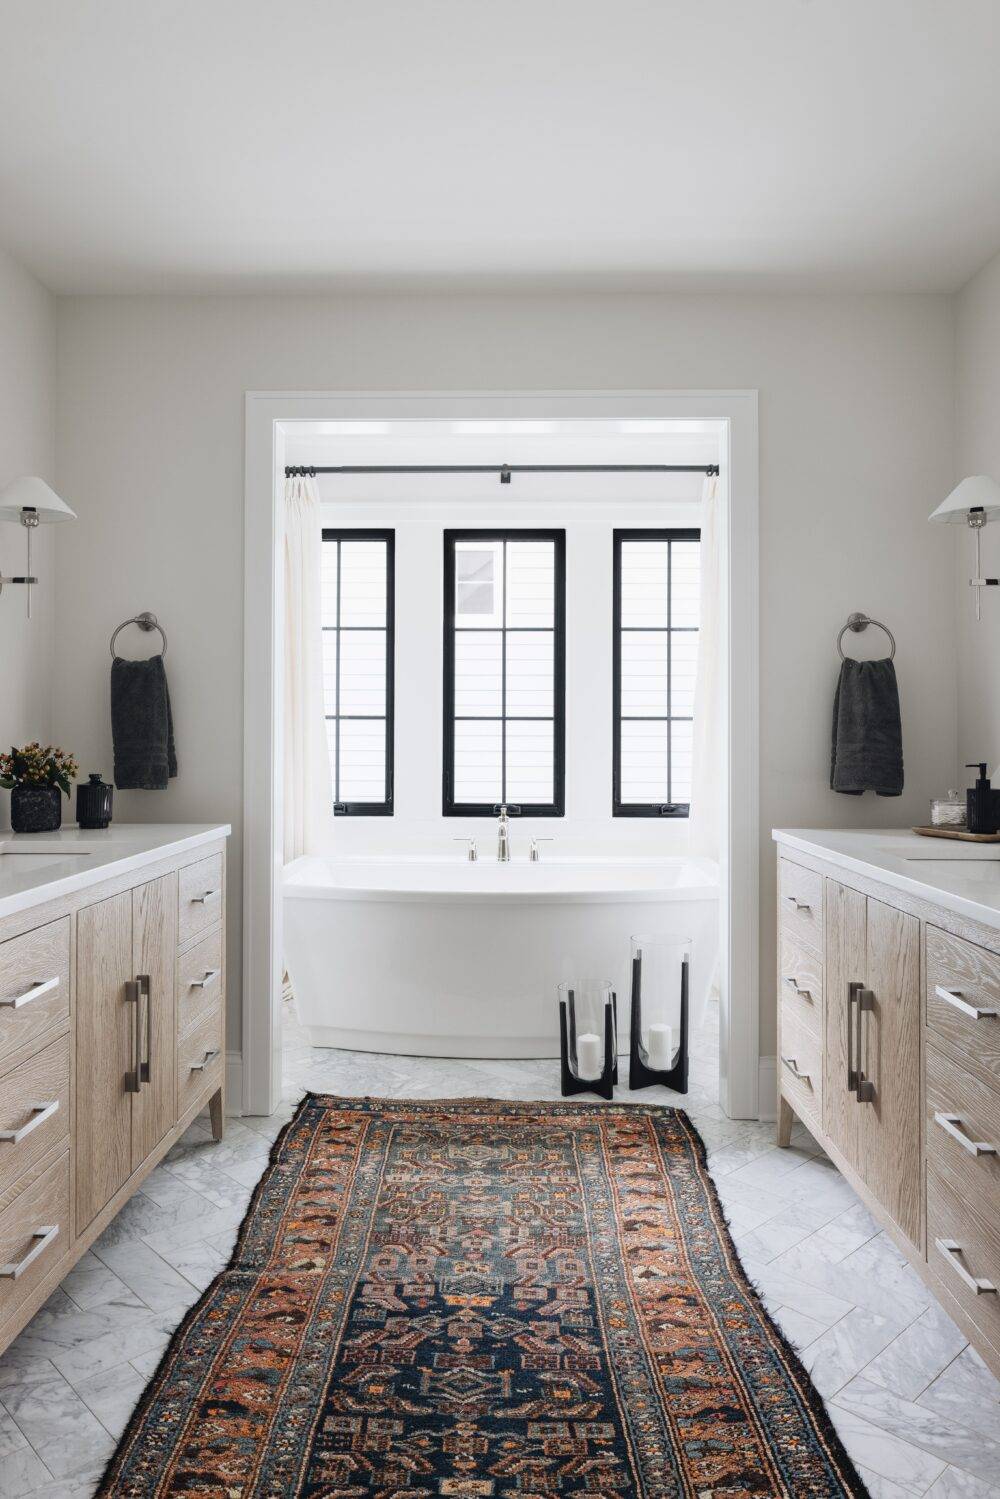 Luxurious white bathroom with white marble floor tiles in herringbone pattern and wooden cabinets. 